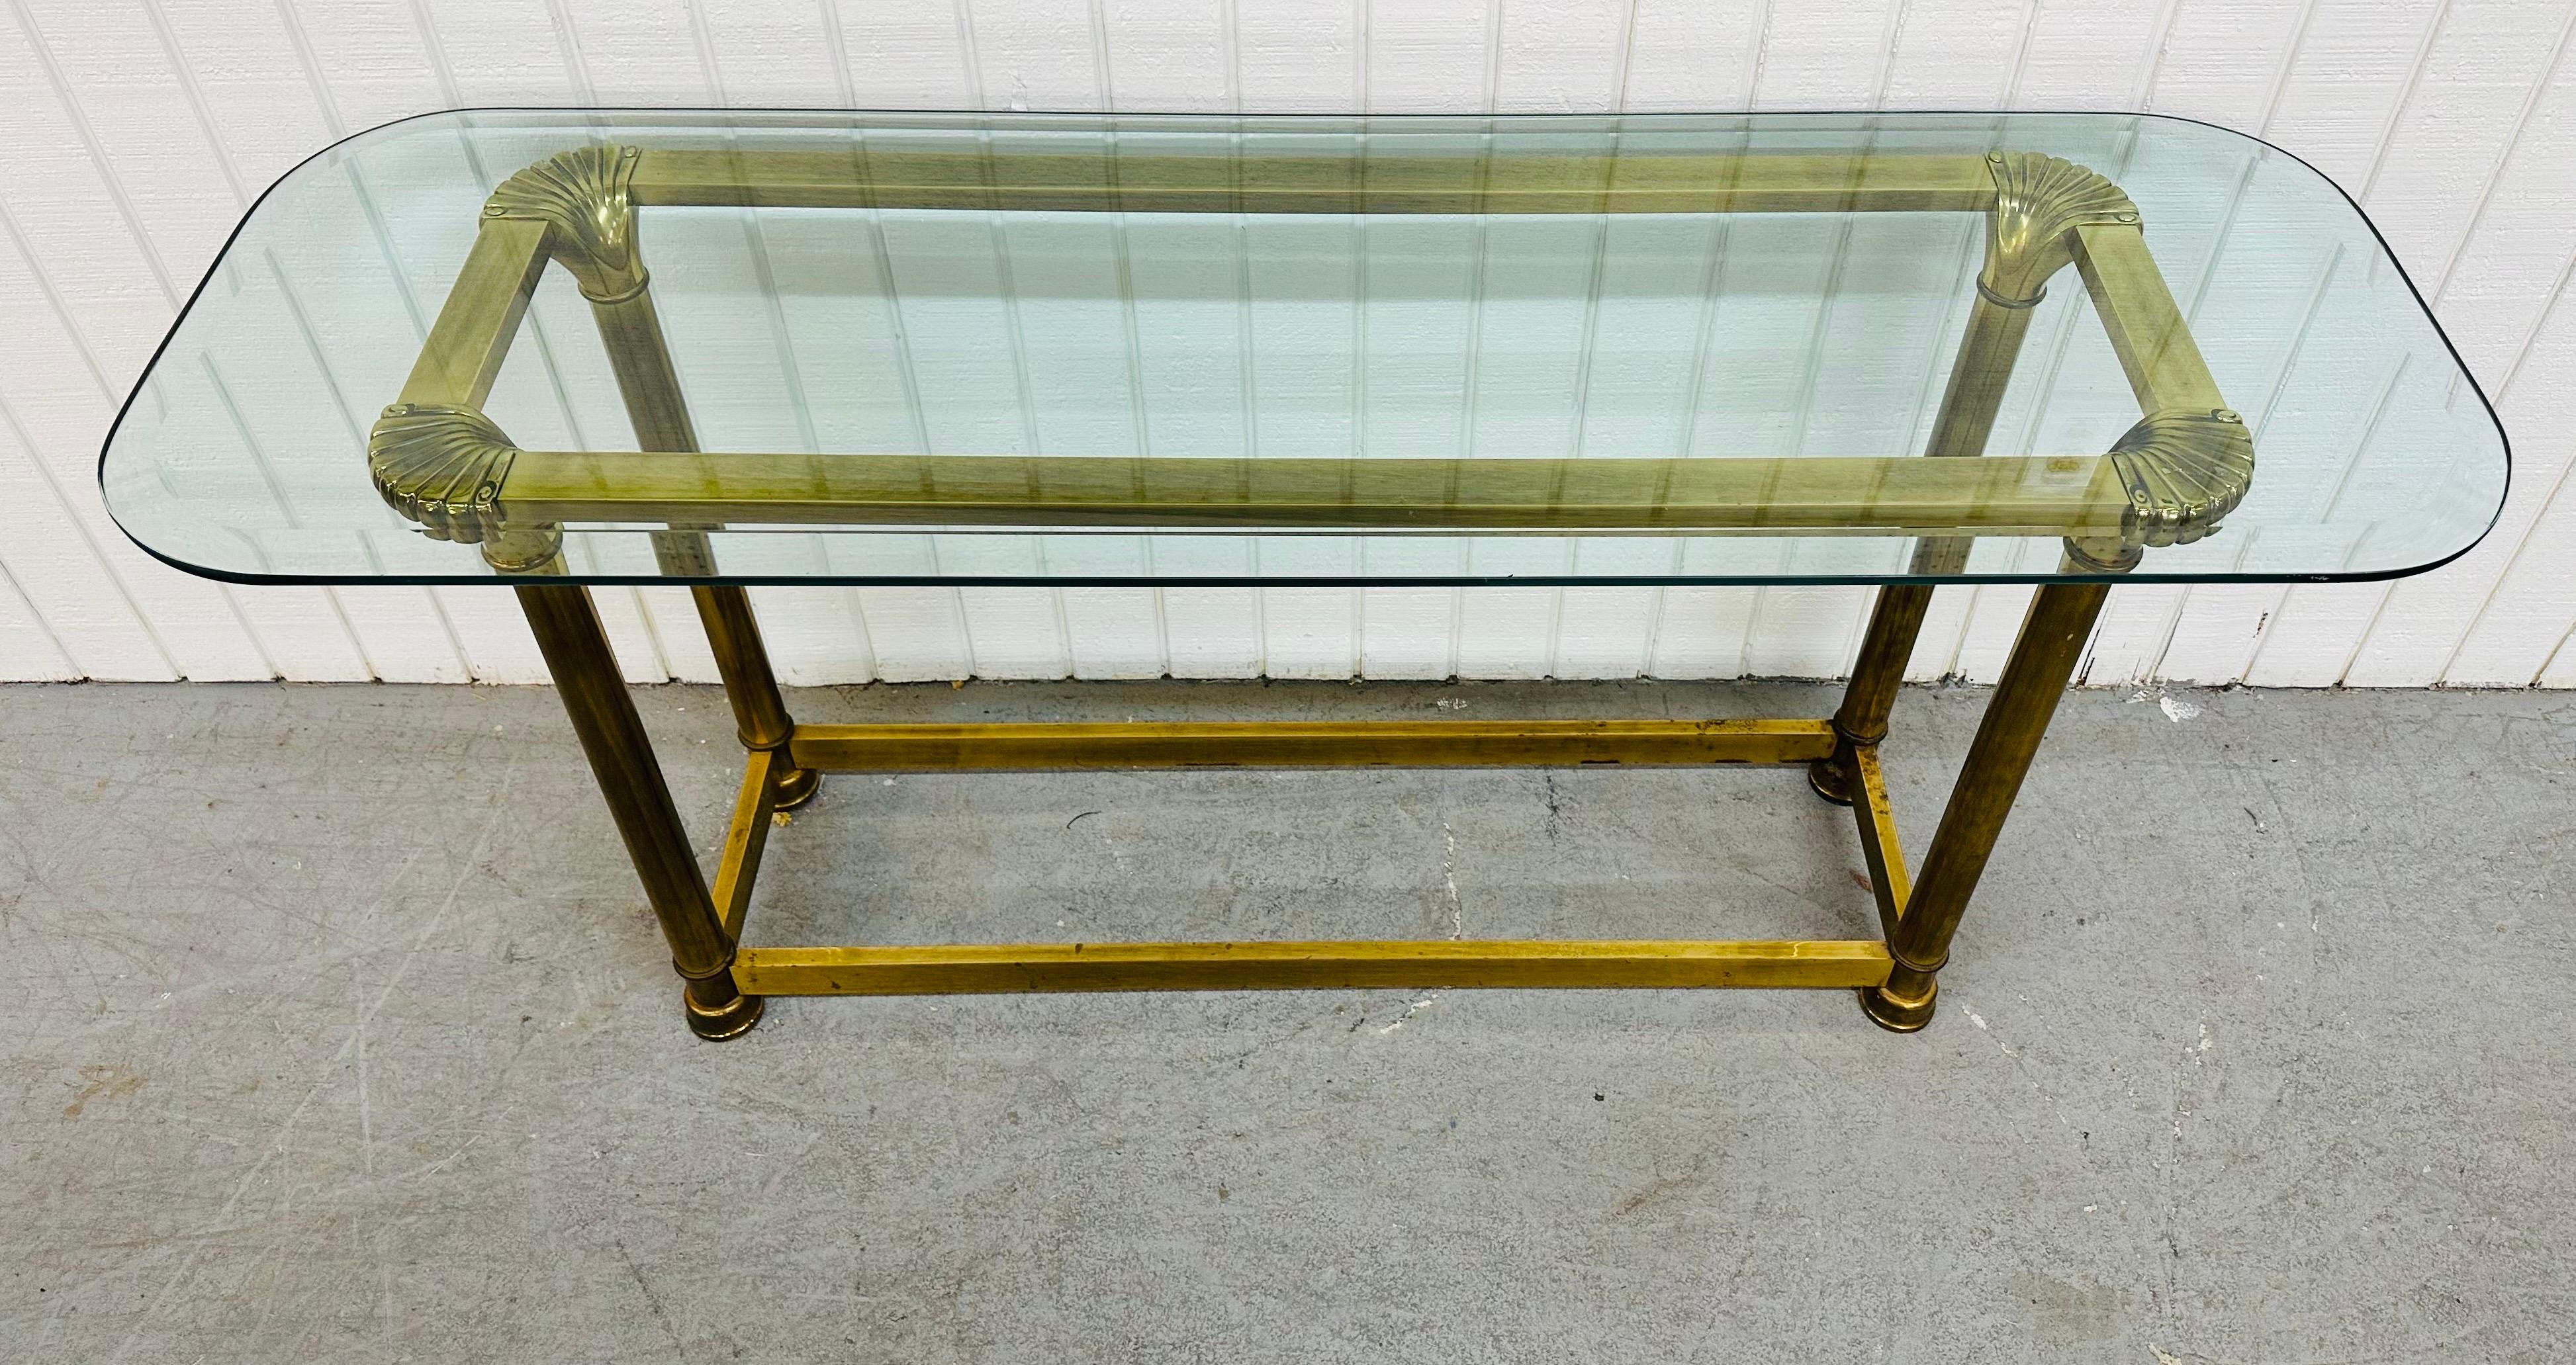 This listing is for a vintage Mastercraft Style Brass & Glass Sofa Table. Featuring a heavy brass base, a shell design on each corner, and a beveled glass top. This is an exceptional combination of quality and design!